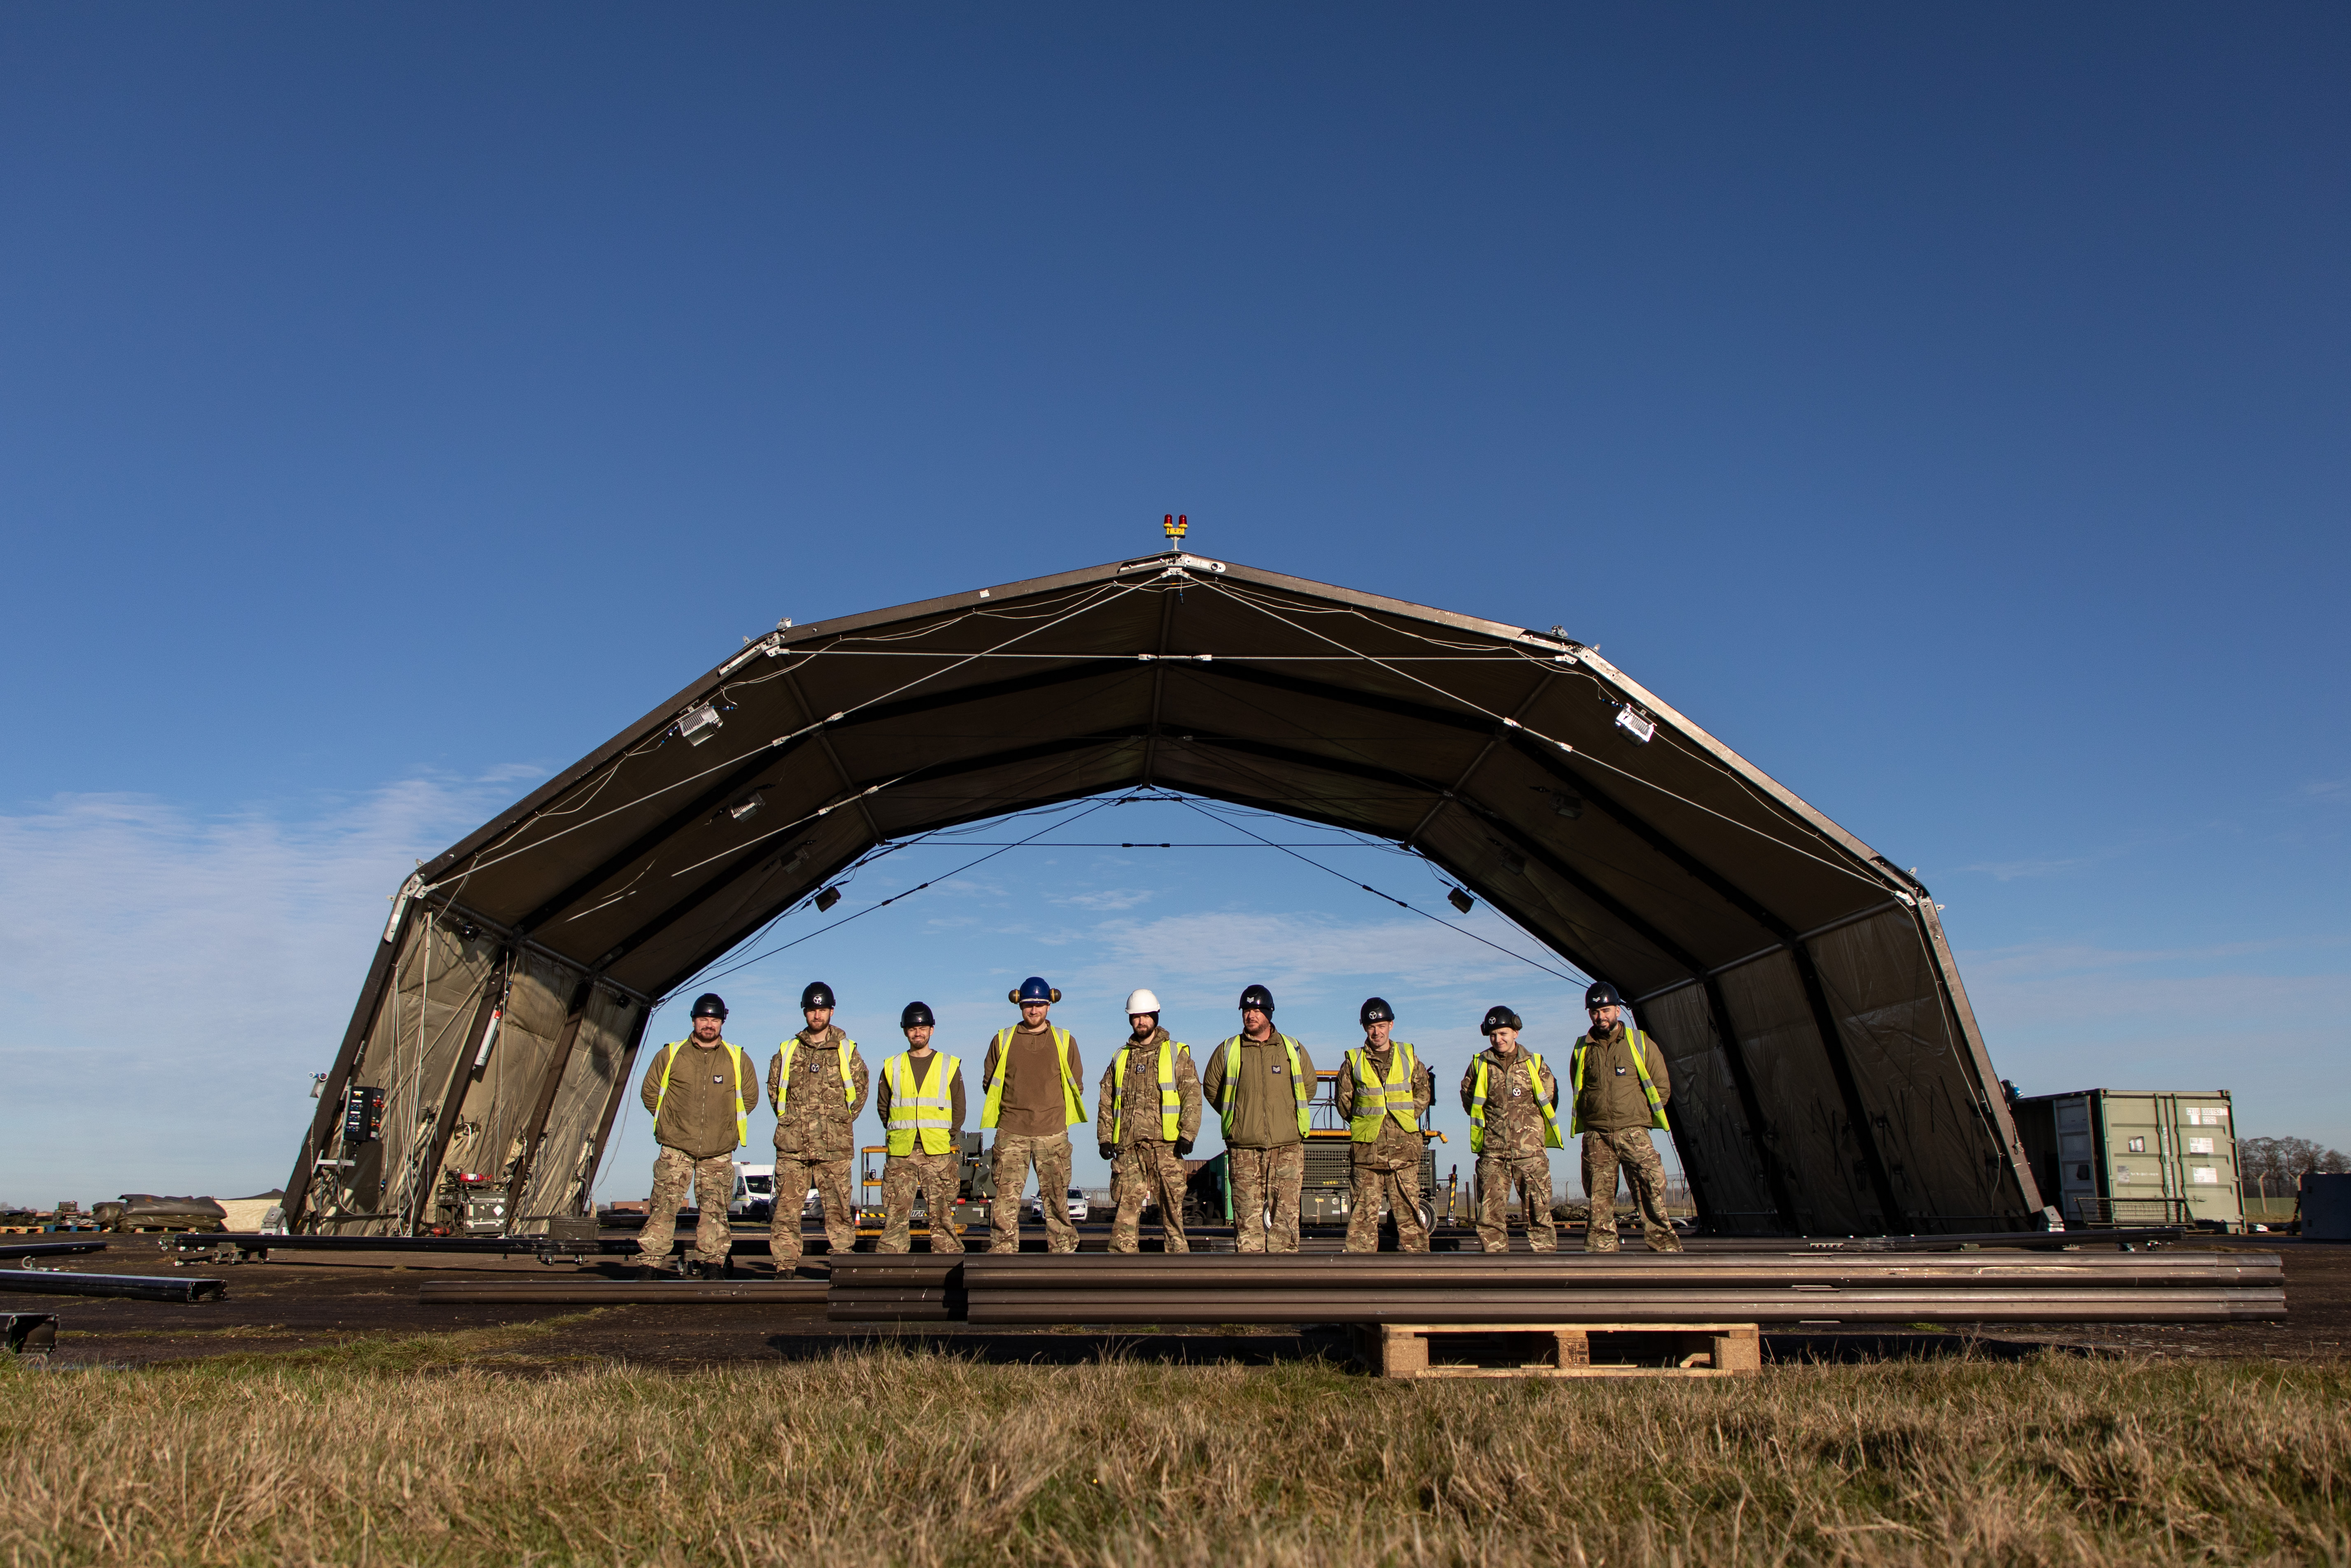 The Expeditionary Airfield Facilities (EAF) Flight from 5001 Squadron, training on a hangar build at RAF Wittering